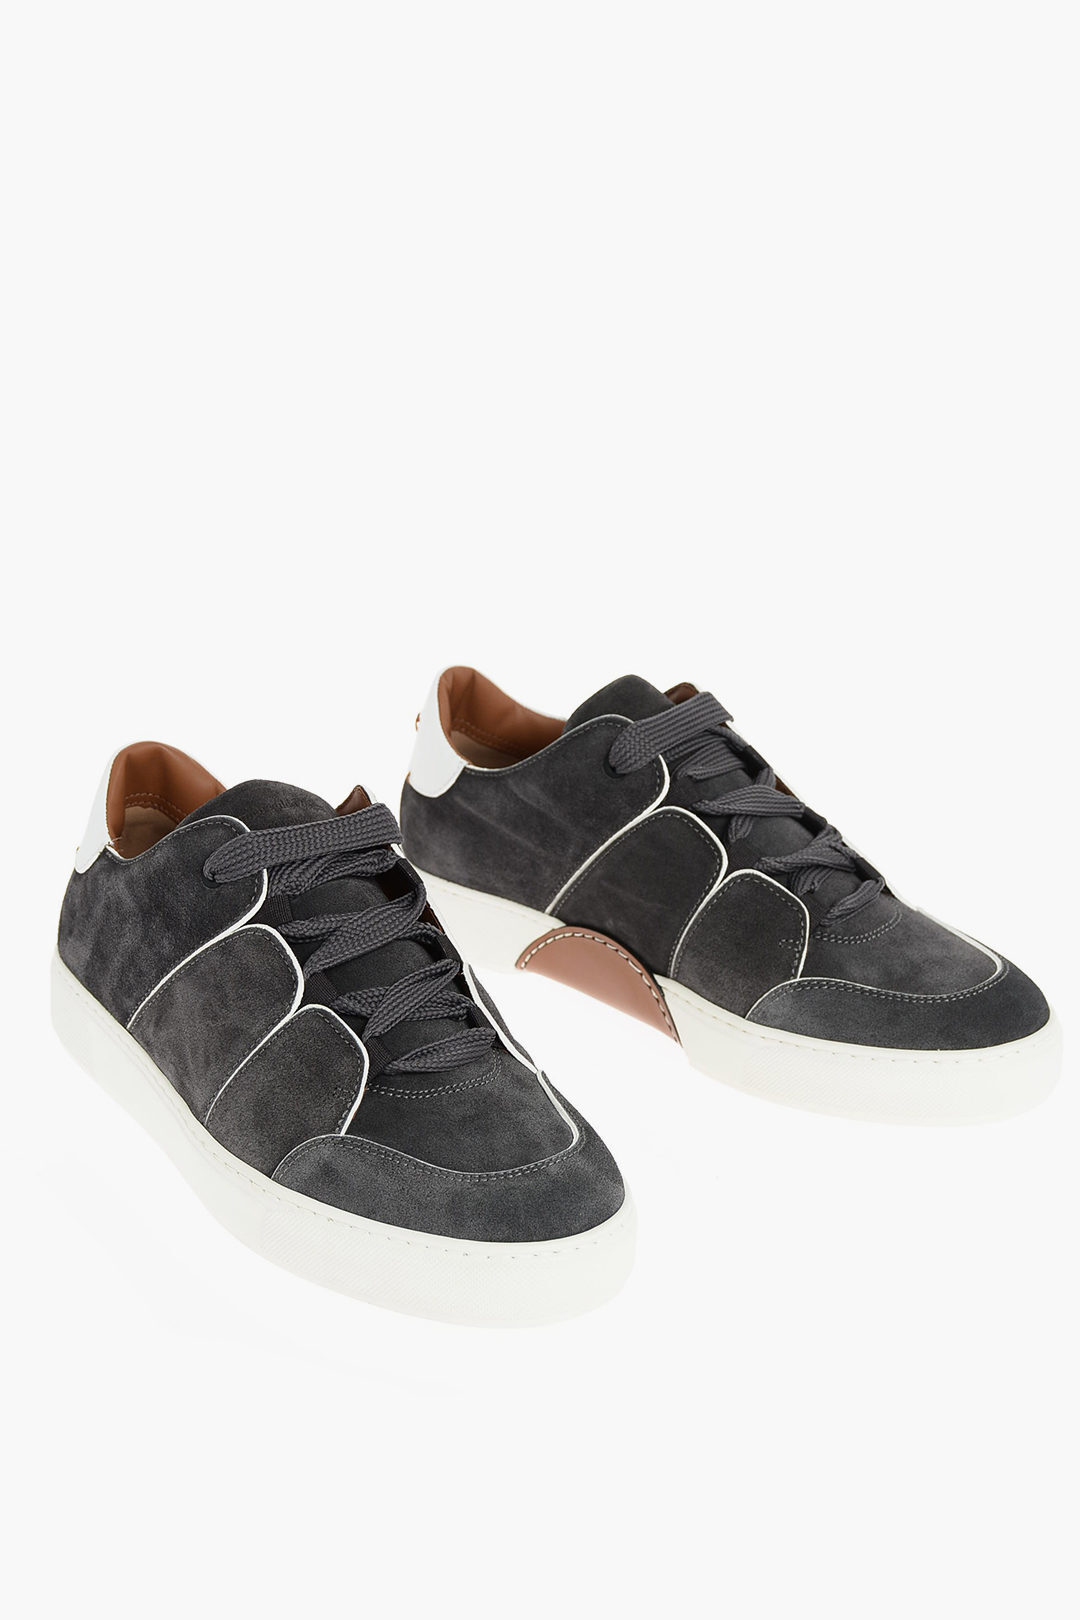 ZEGNA ゼニア Gray スニーカー A2975X LHKUD 022 メンズ COUTURE XXX SUEDE LEATHER SNEAKERS  dk